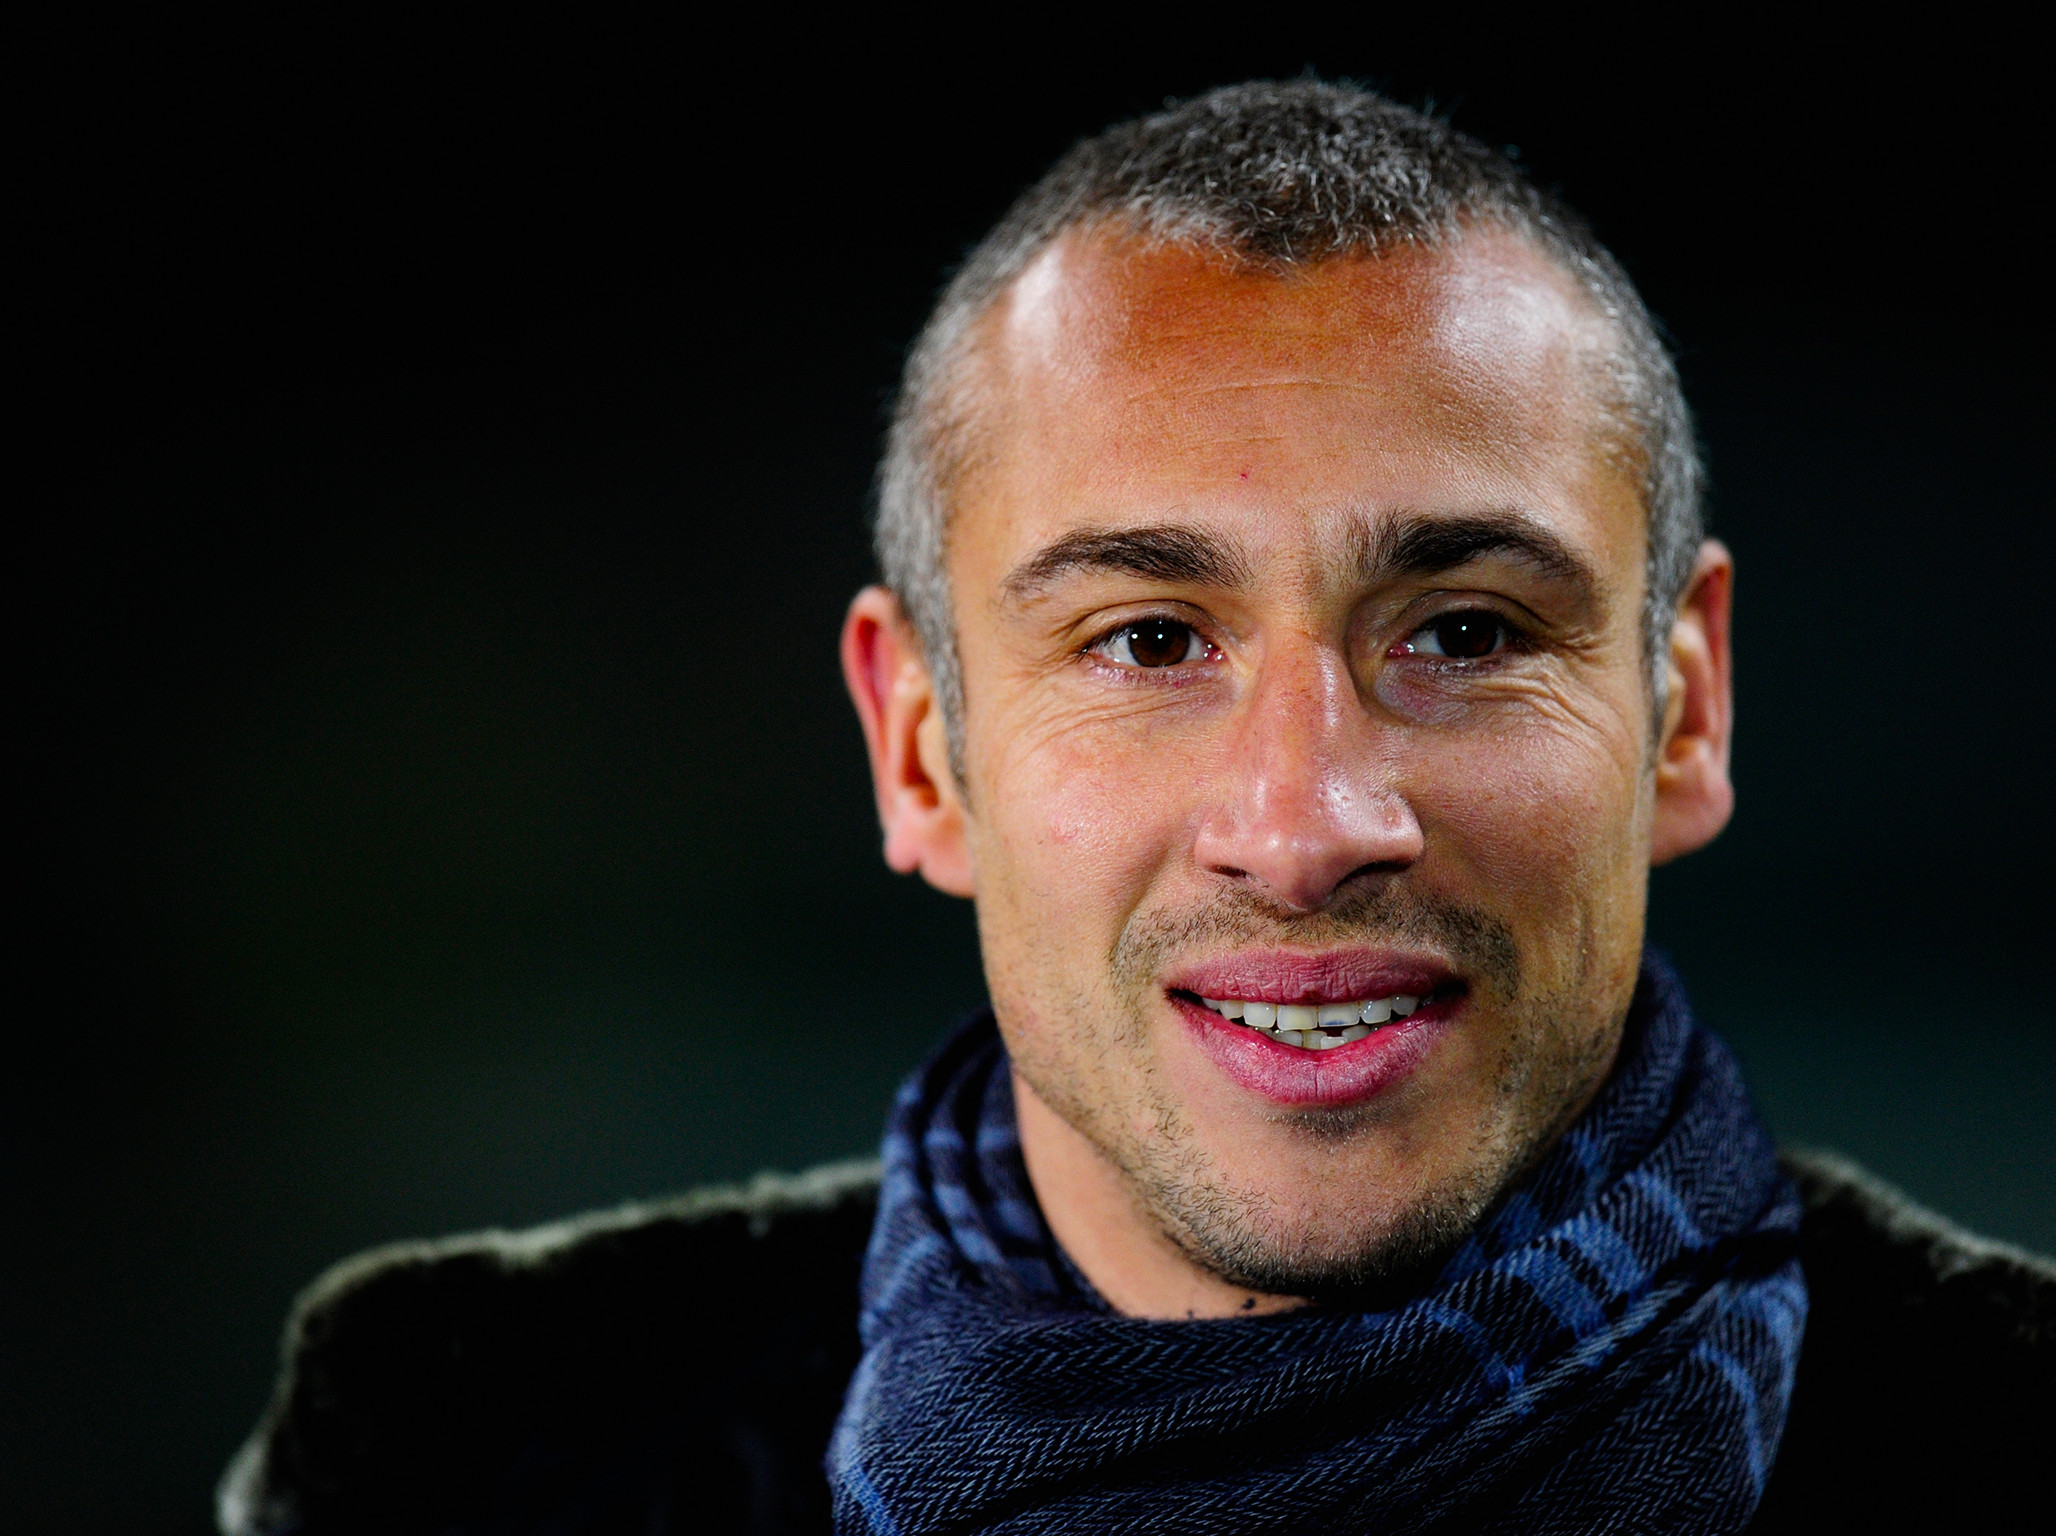 Henrik Larsson says of Helsingborg: ‘This is my city, but I want to leave Sweden’